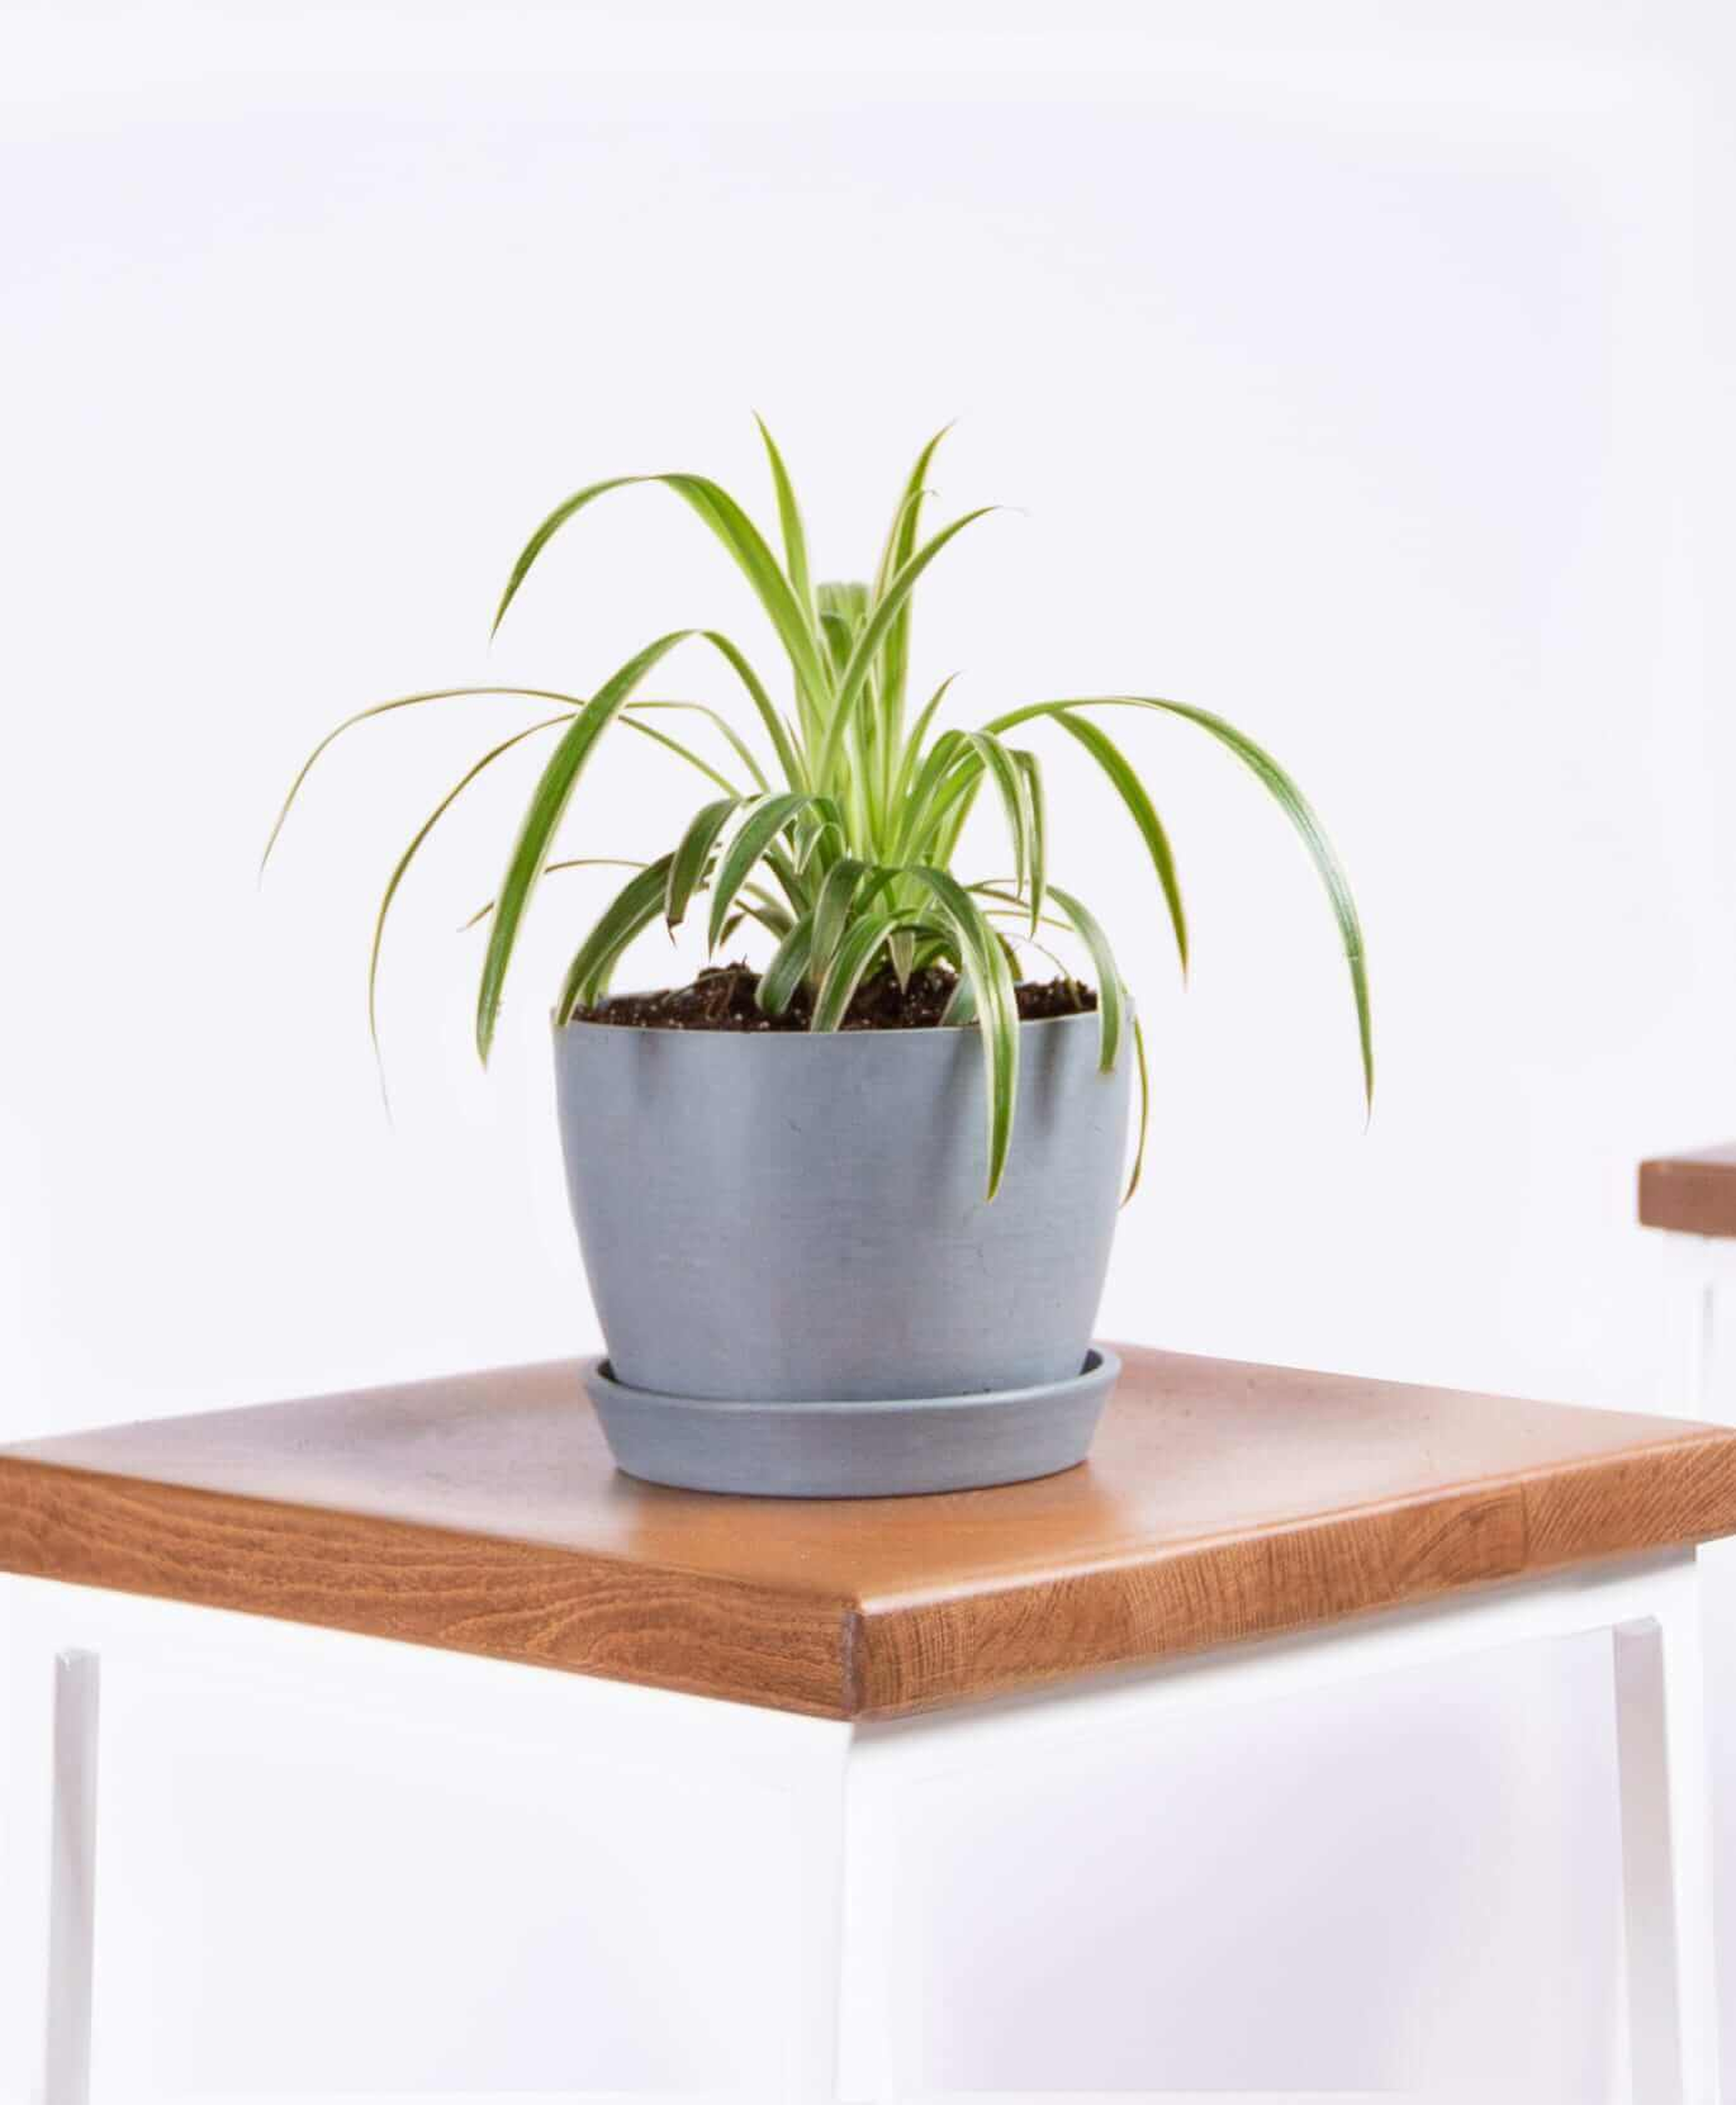 Spider plant - Slate - Bloomscape